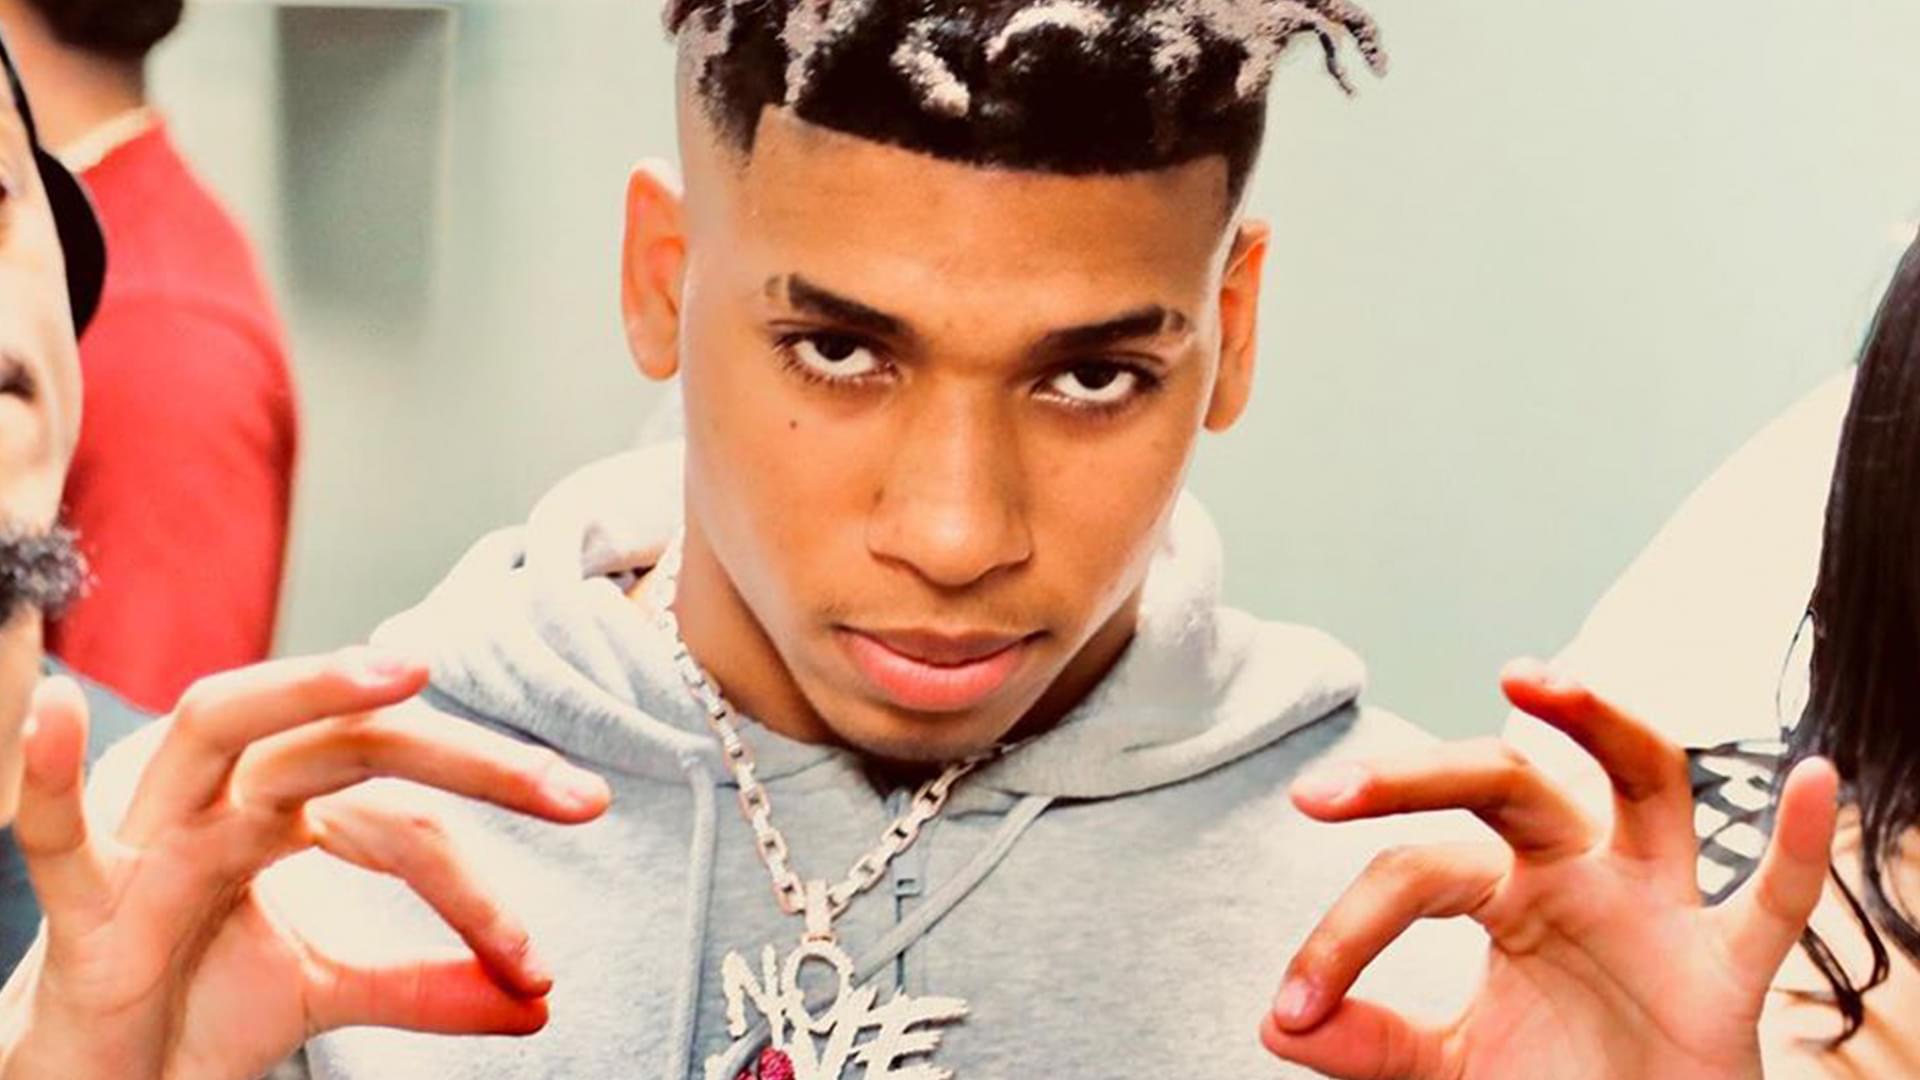 NLE Choppa has had a hell of a year to say the least, and he continues to d...